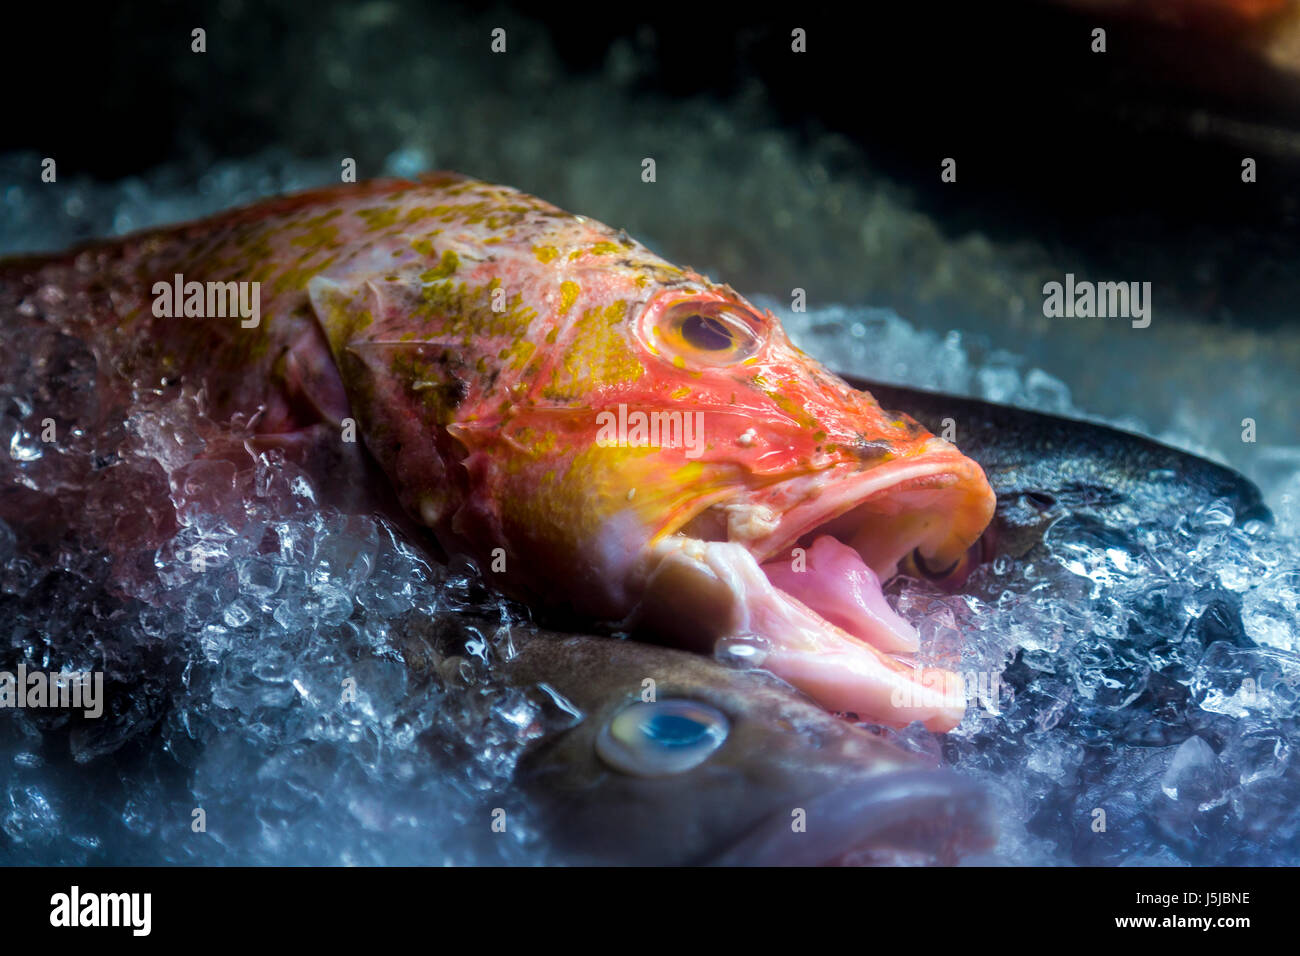 Fresh fish in crushed ice at a stall Stock Photo